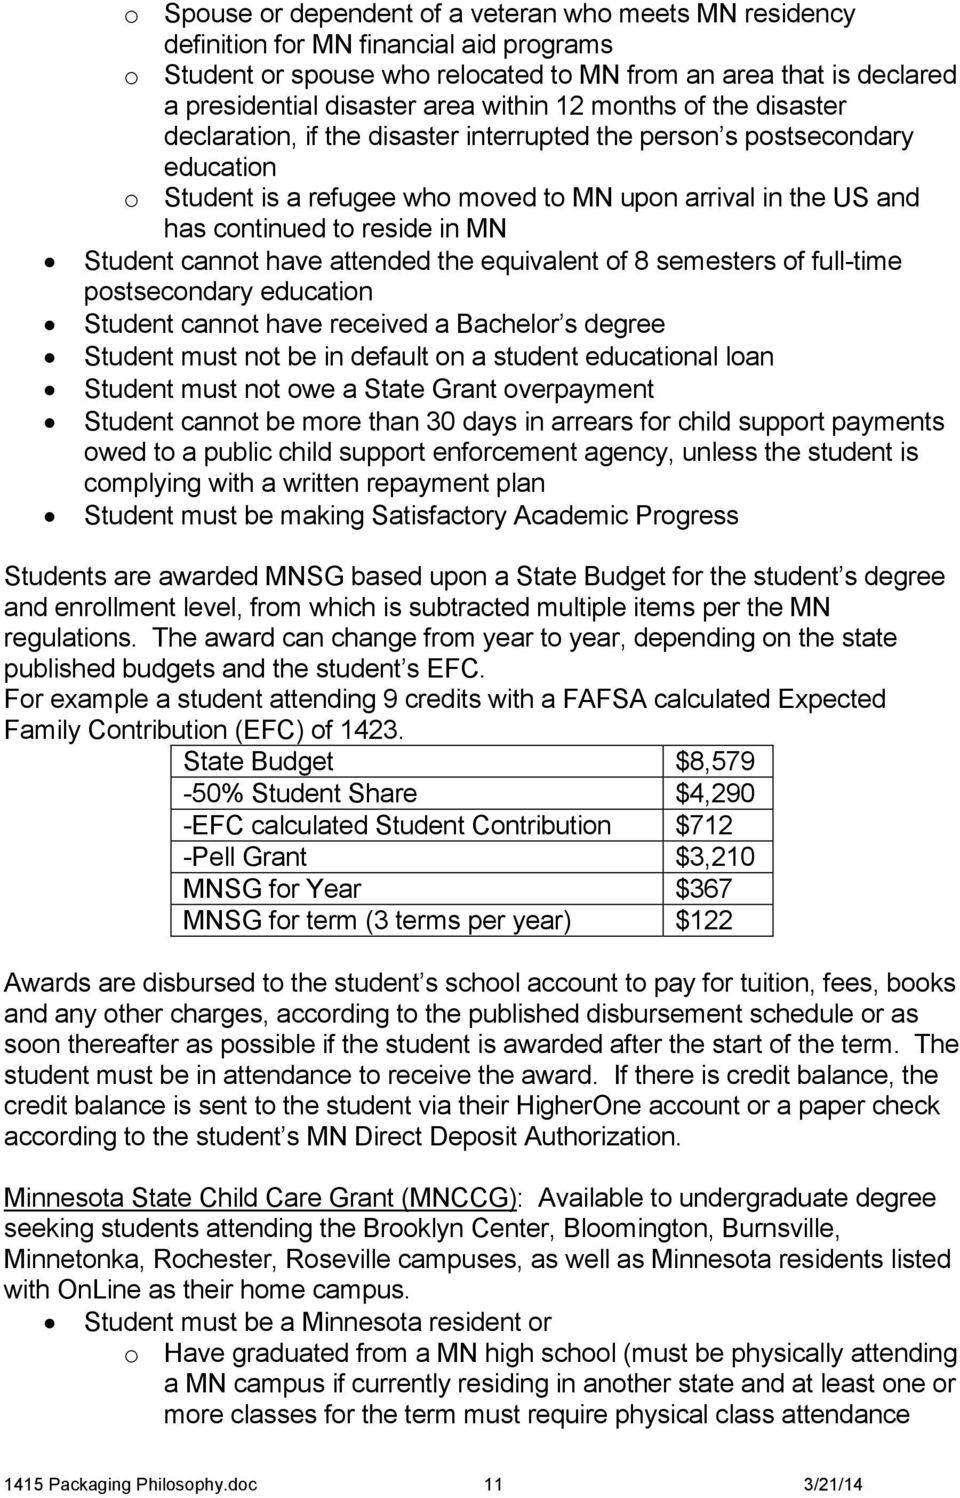 reside in MN Student cannot have attended the equivalent of 8 semesters of full-time postsecondary education Student cannot have received a Bachelor s degree Student must not be in default on a